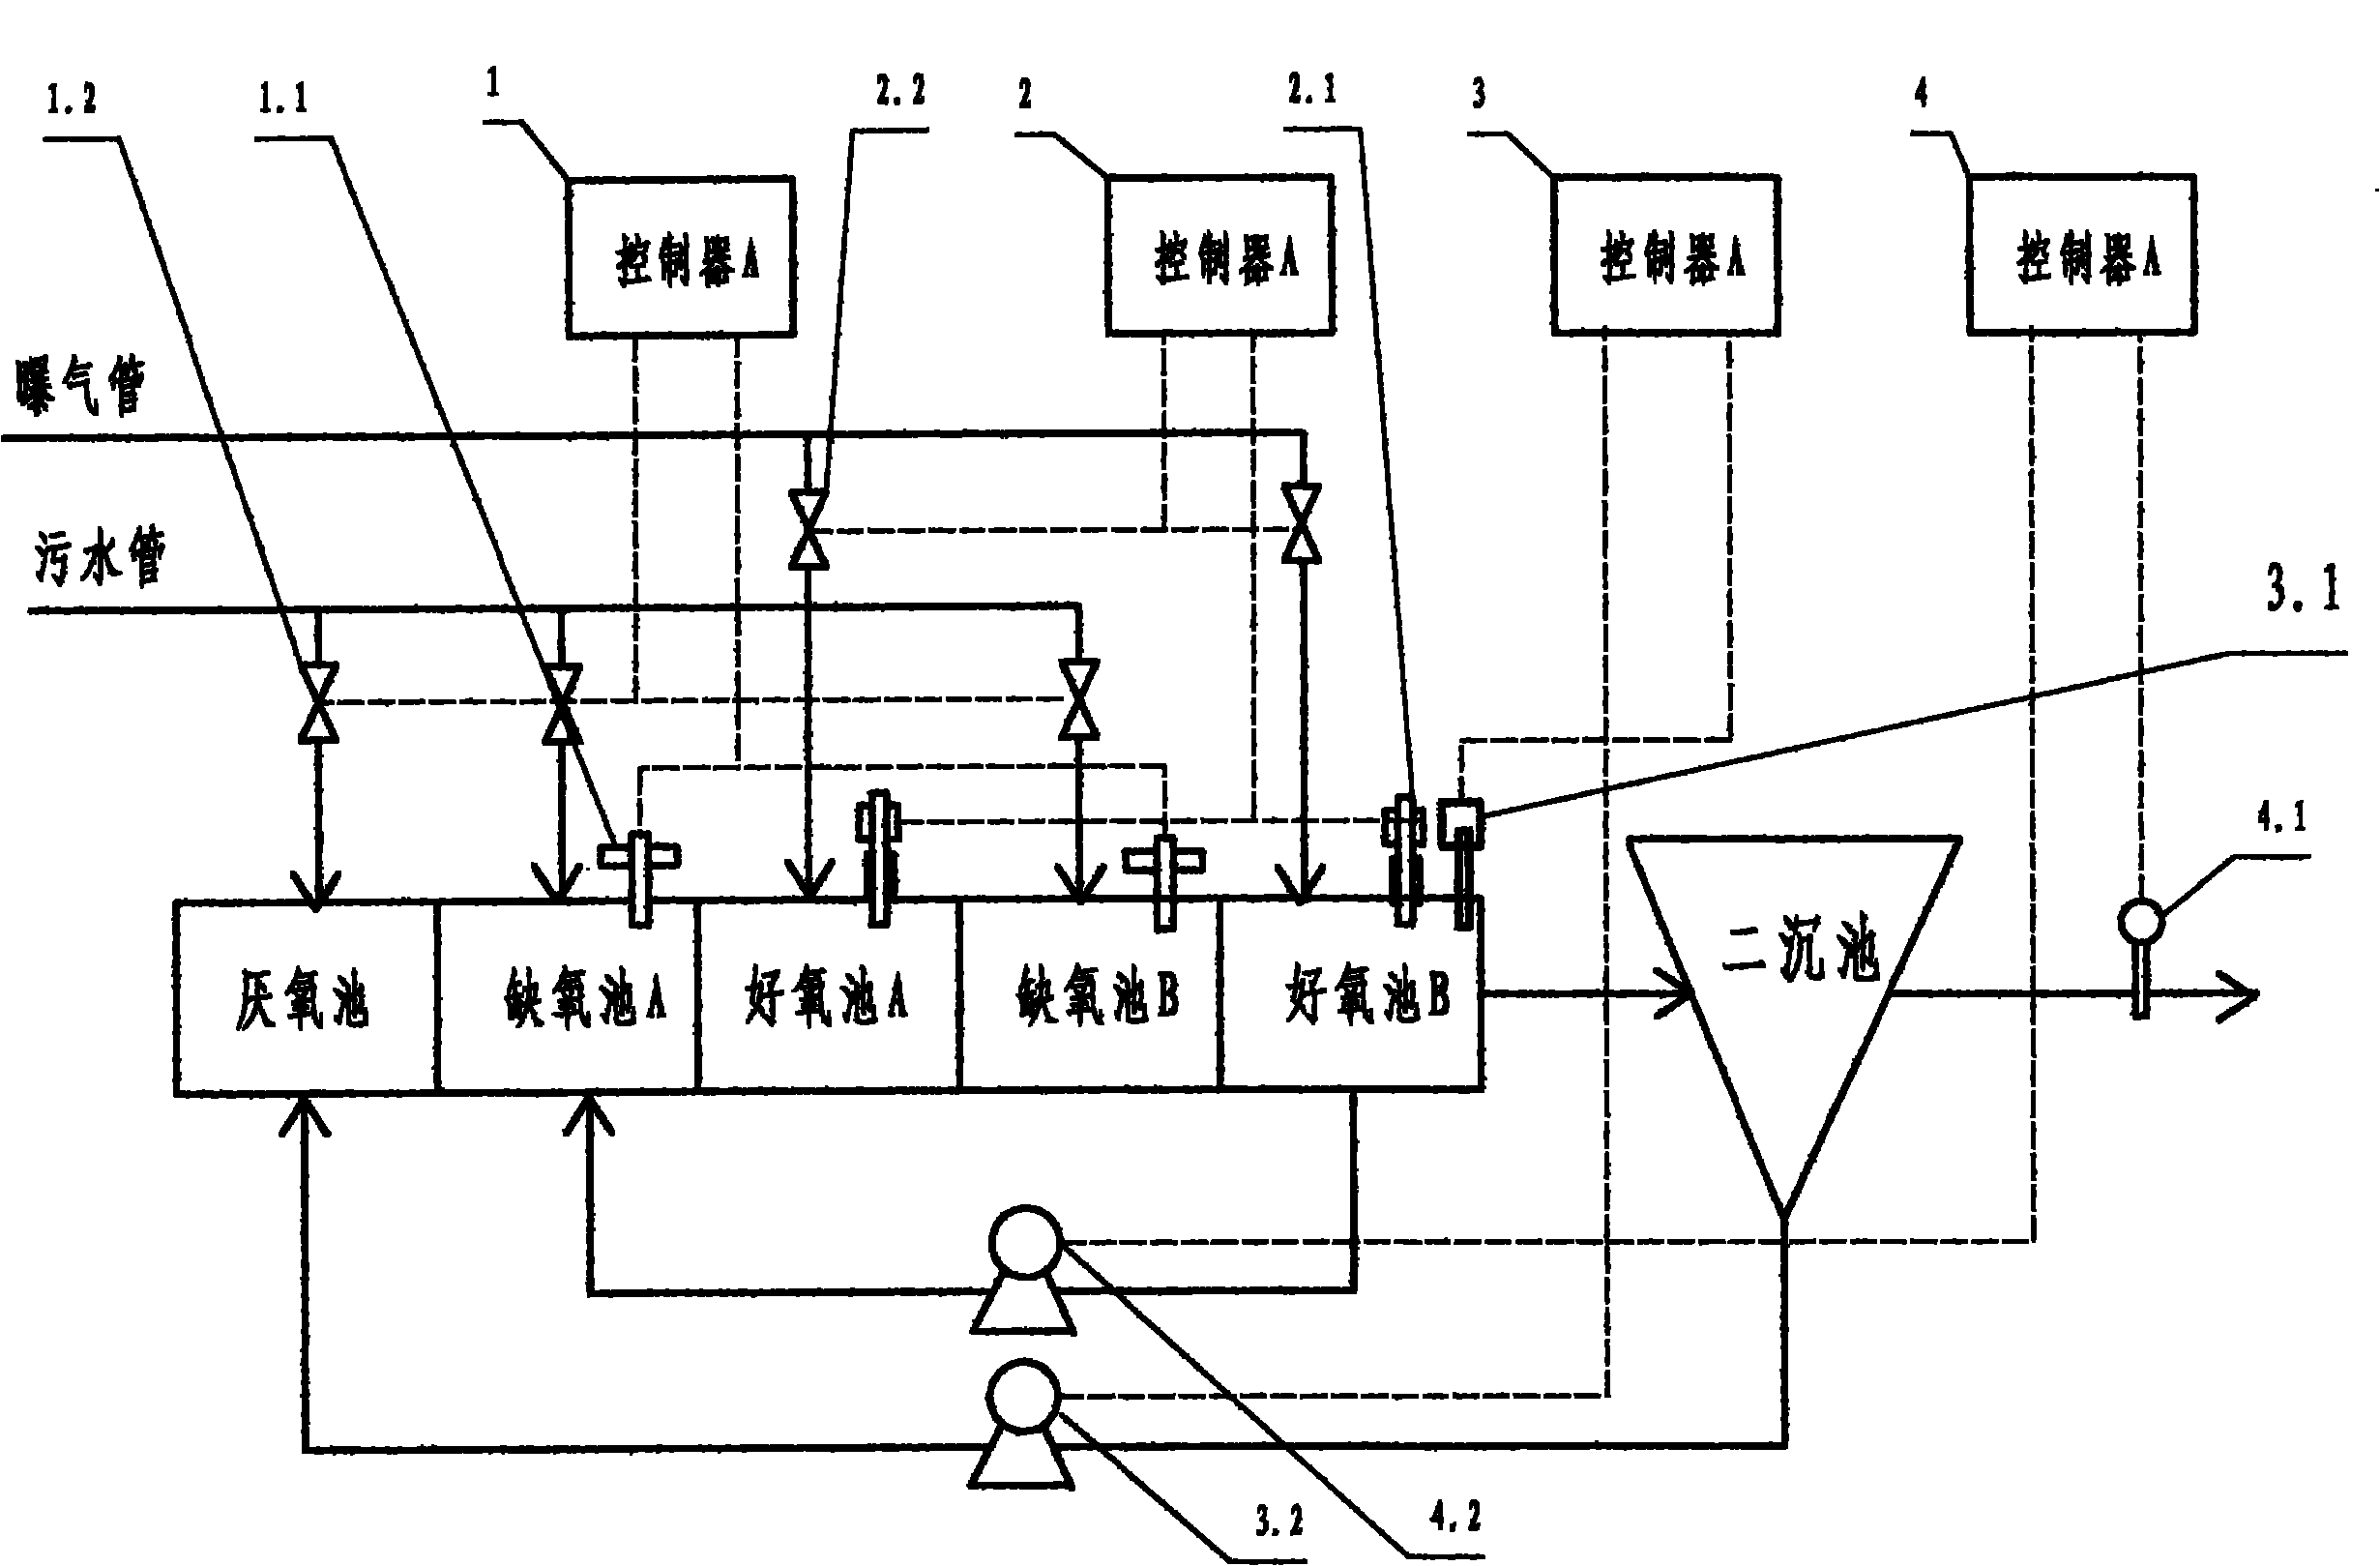 Waste water treatment device and process for synchronously removing nitrogen and phosphorus of sludge concentration microenvironment